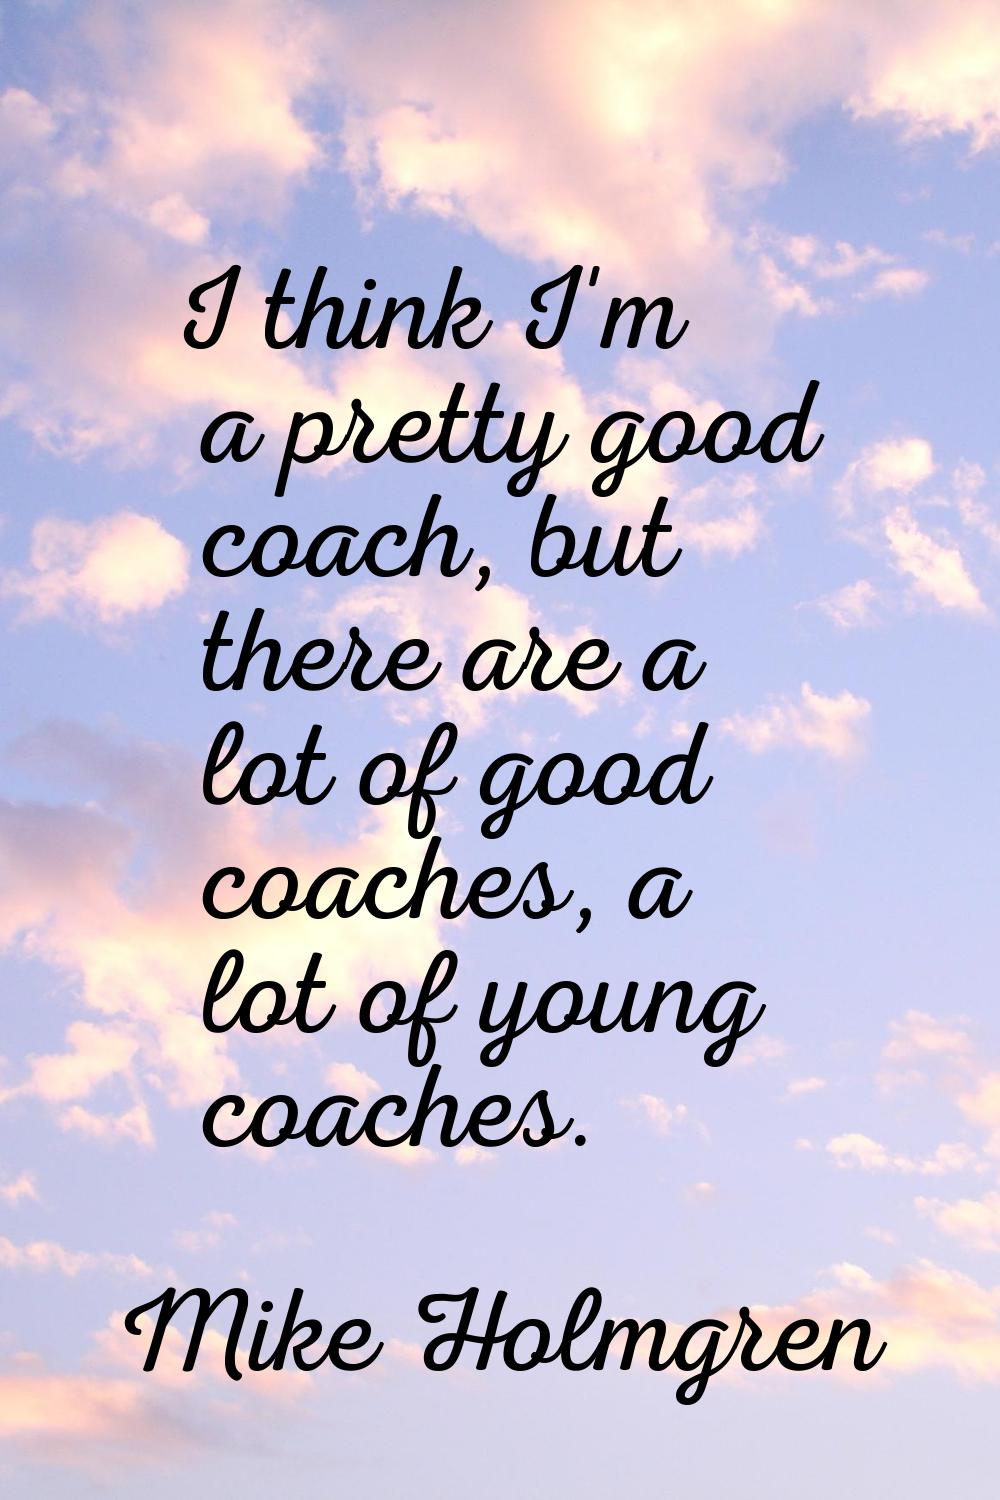 I think I'm a pretty good coach, but there are a lot of good coaches, a lot of young coaches.